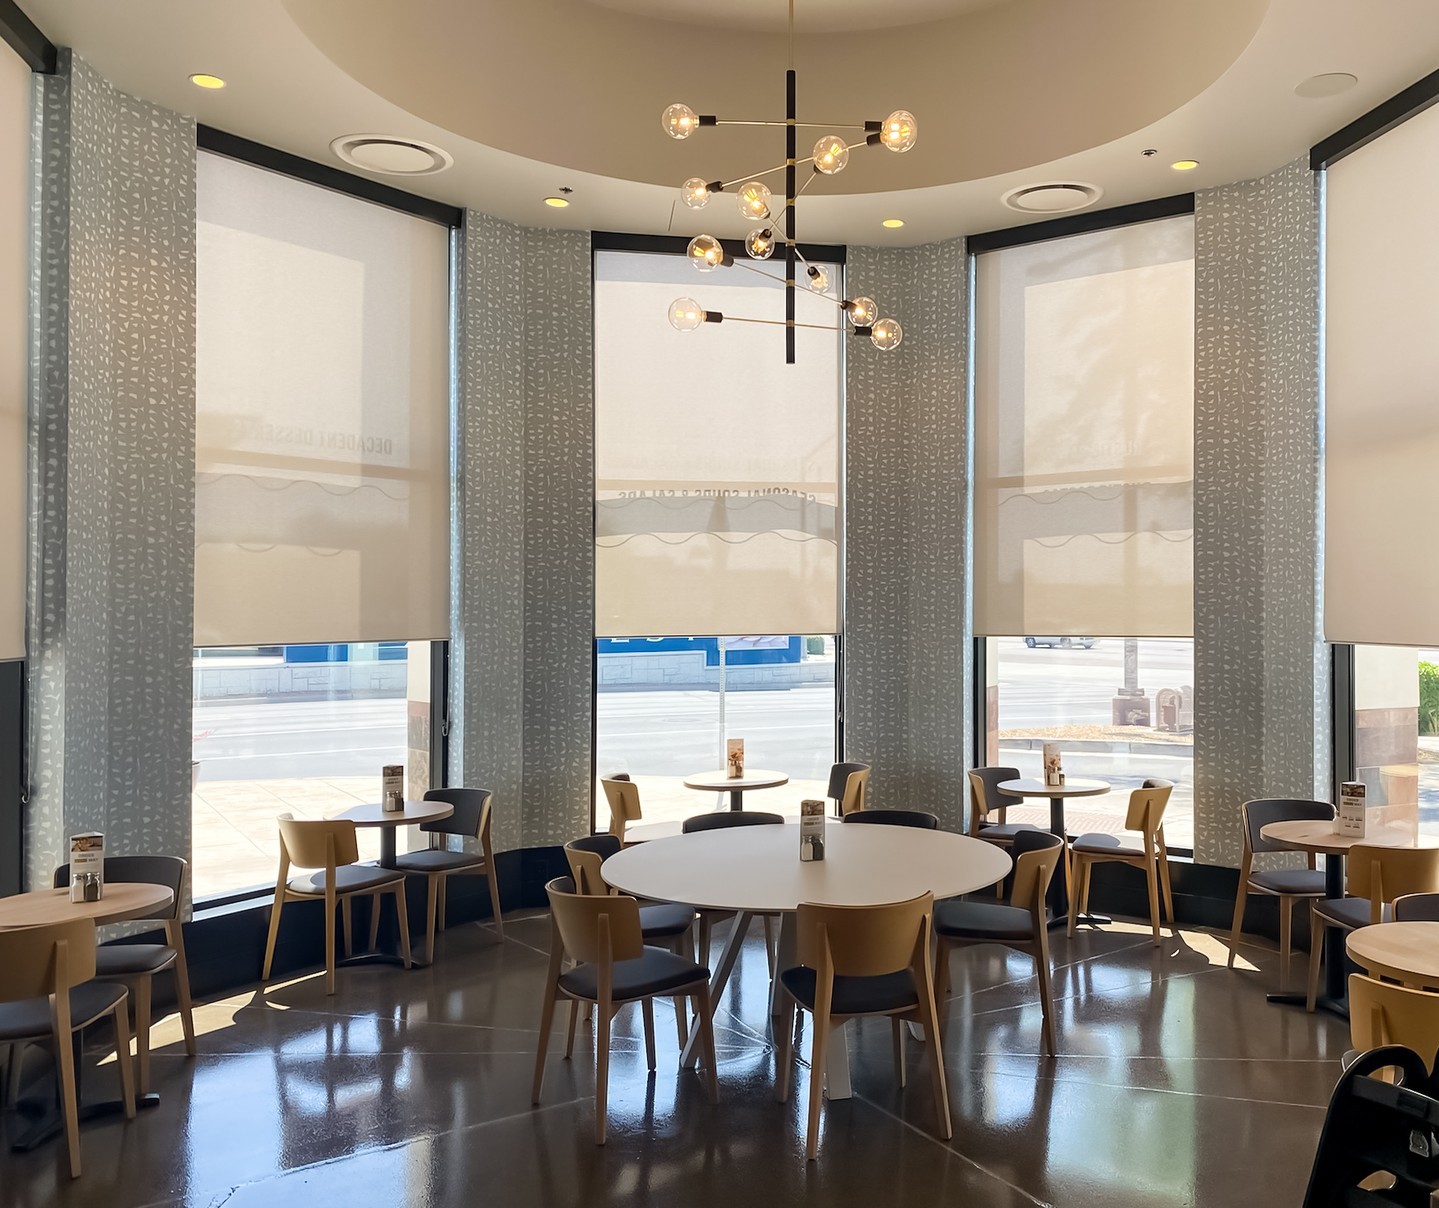 Another amazing shade installation at Wildflower! Thank you to everyone who assisted with this project. We love seeing the final outcome come together. 👏
#Wildflower #shade #wildflowershade #rollershades #windowshades #RollAShade